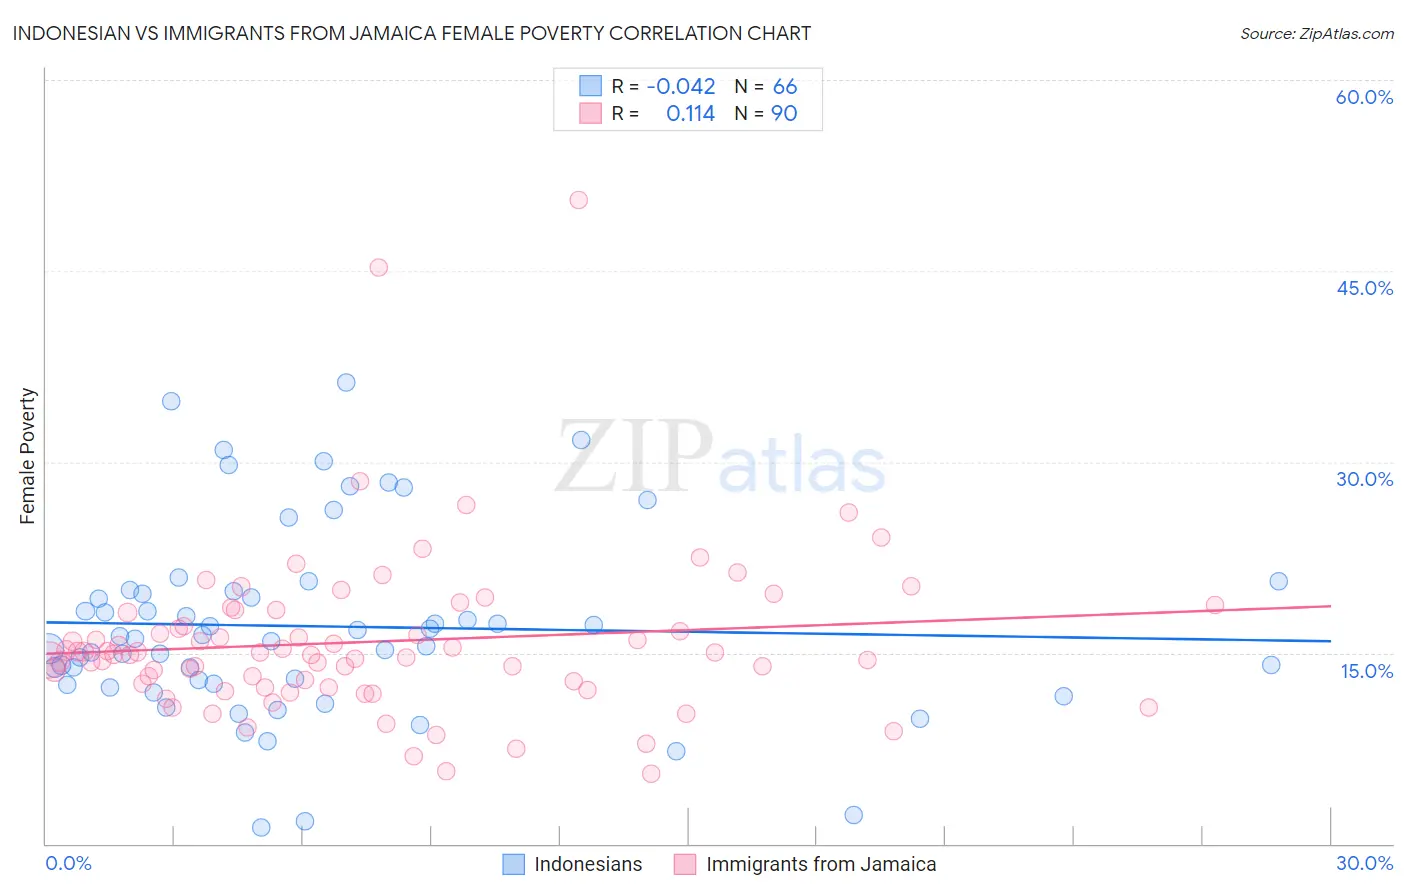 Indonesian vs Immigrants from Jamaica Female Poverty